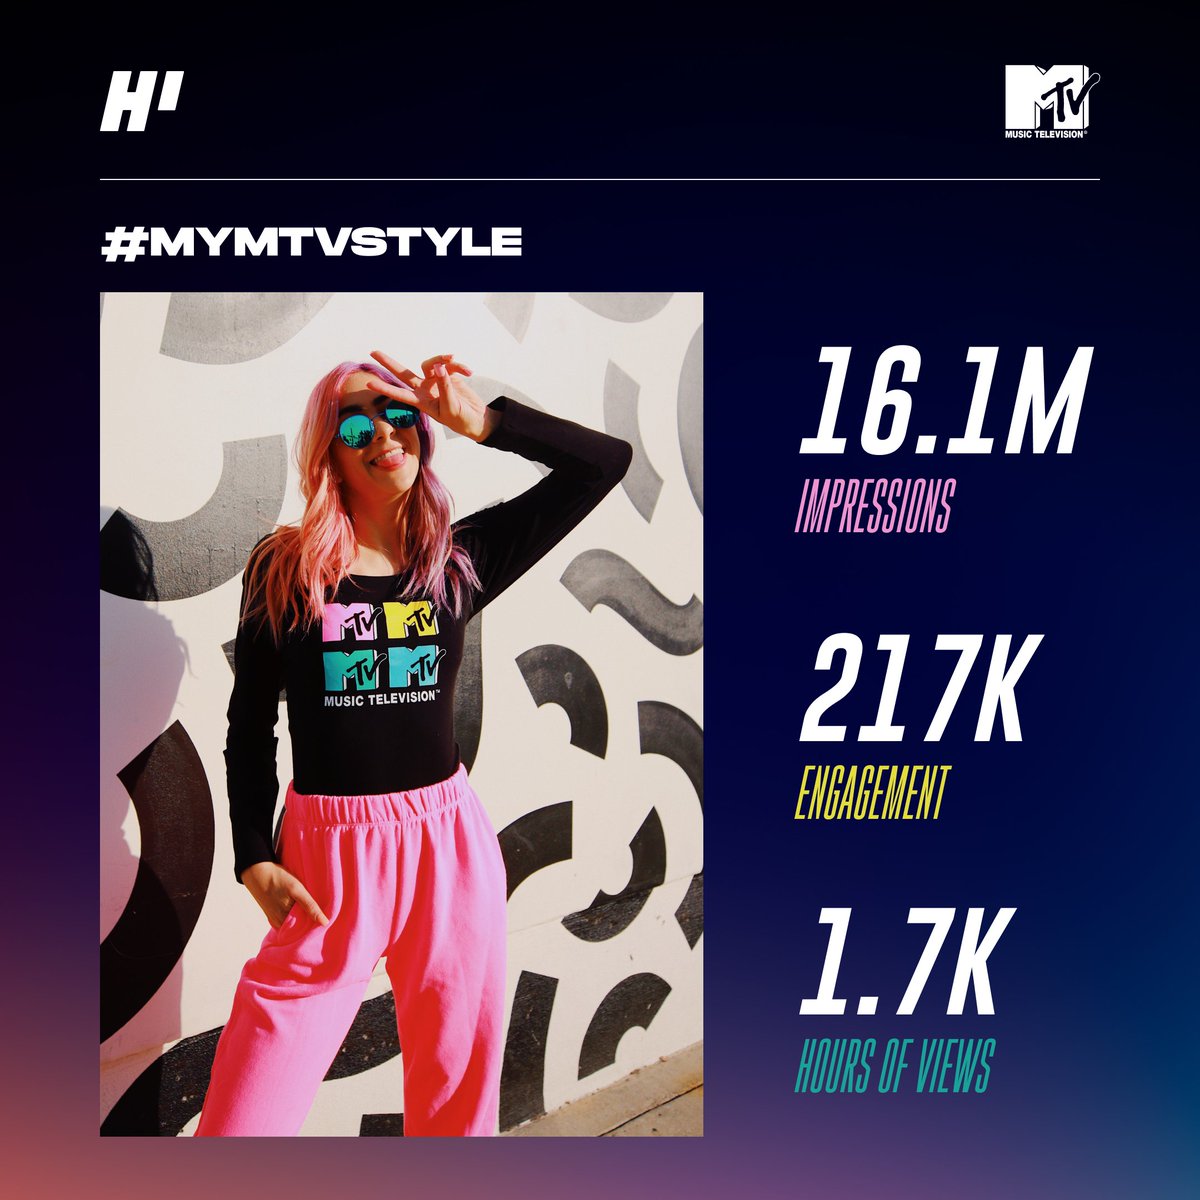 🔦#CampaignSpotlight 🔦 TikTok has undoubtedly emerged as an ideal platform for brands seeking to connect with Gen Z consumers. But the question remains: How can brands execute influencer marketing campaigns effectively? 

Dive into our case study, #MyMTVStyle, to discover the